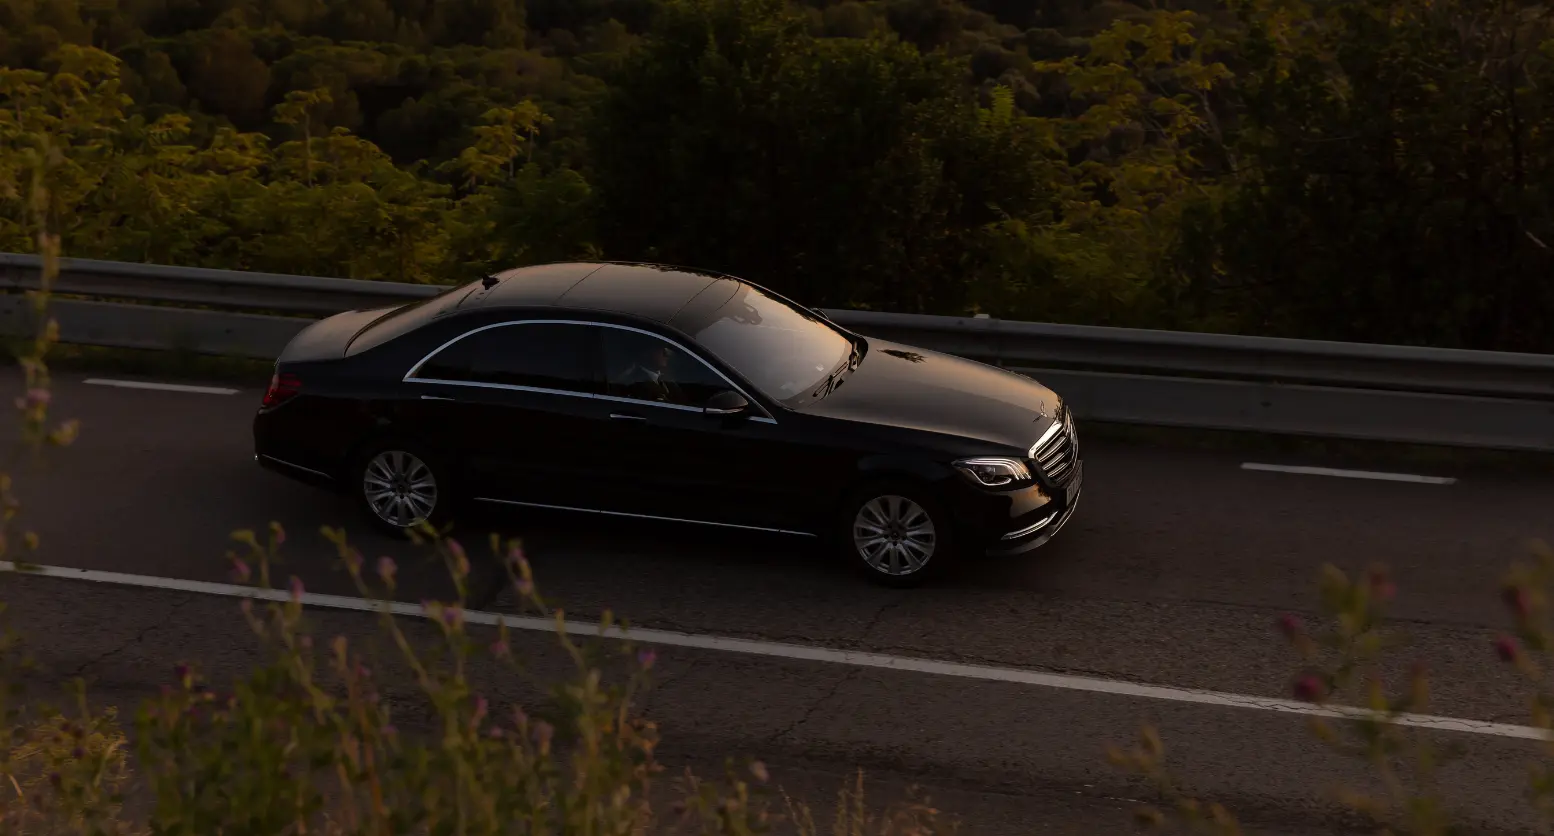 Mercedes - benz s-class driving on a mountain road.